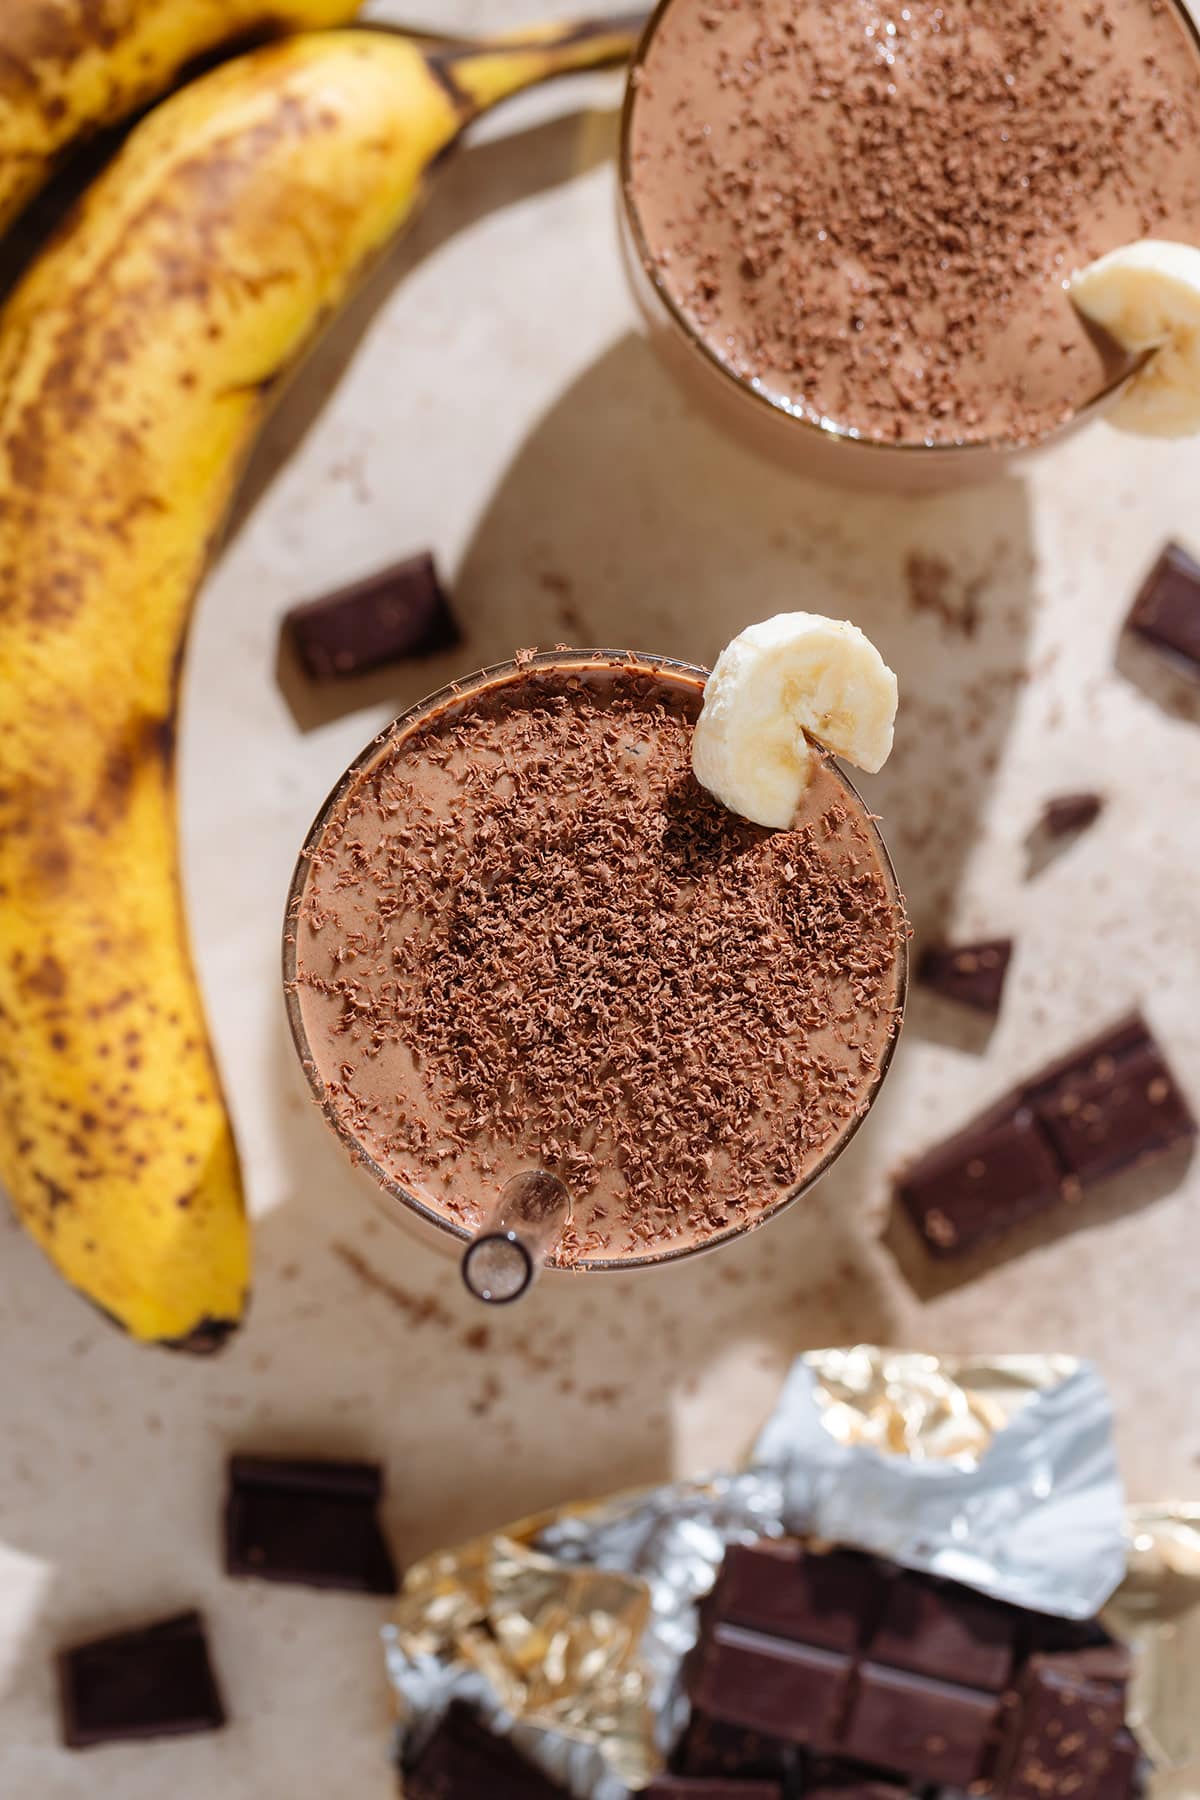 Chocolate smoothie in a tall glass garnished with a slice of banana and shaved chocolate.